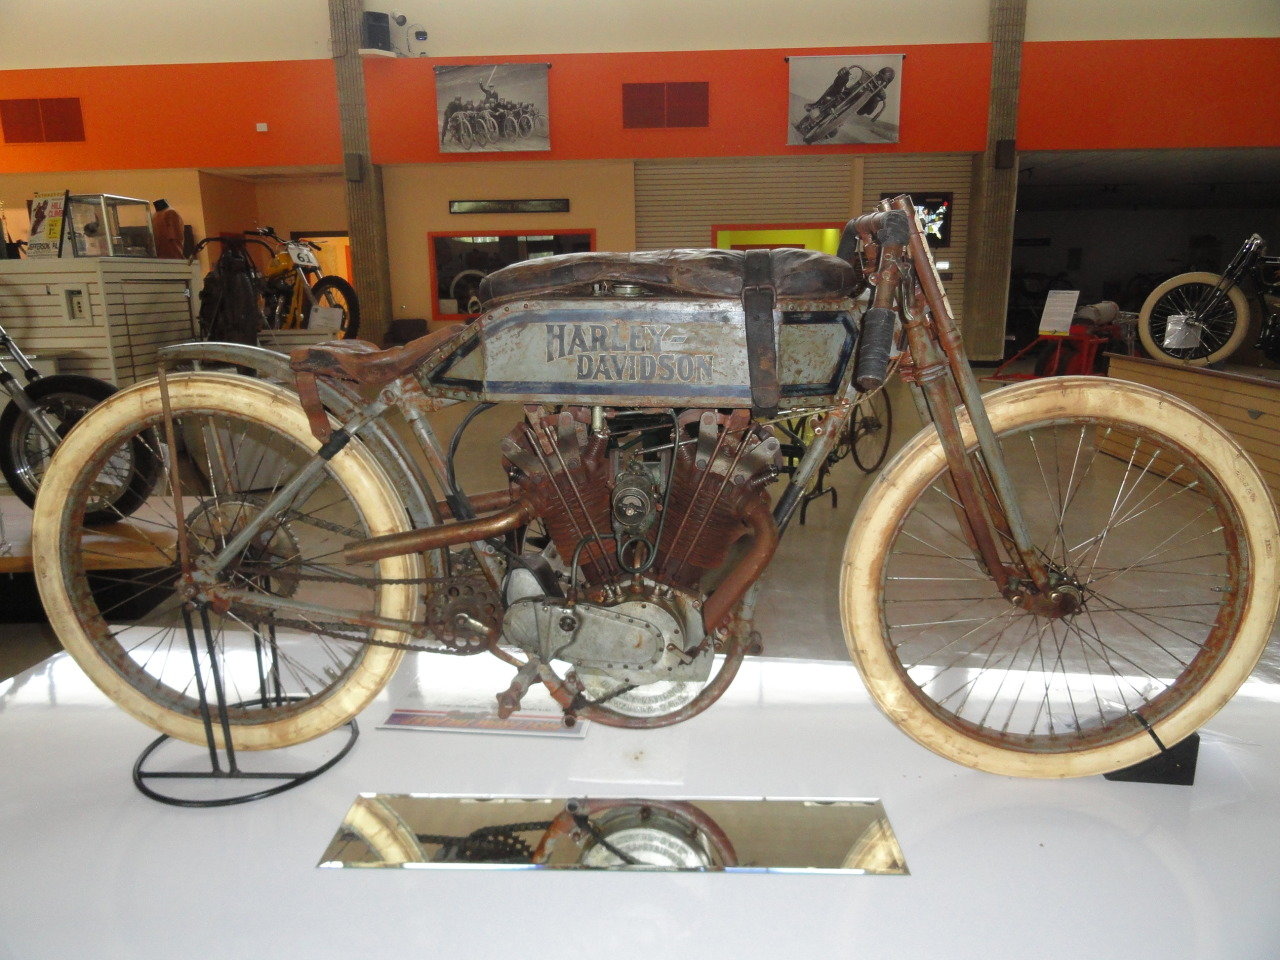 A 1915 Harley-Davidson Dodge City racer shown at the Motorcyclepedia Museum in Newburgh, NY. Note the leather pad wrapped on the fuel tank that allowed rider to lay down his chest and minimize wind resistance during the race.